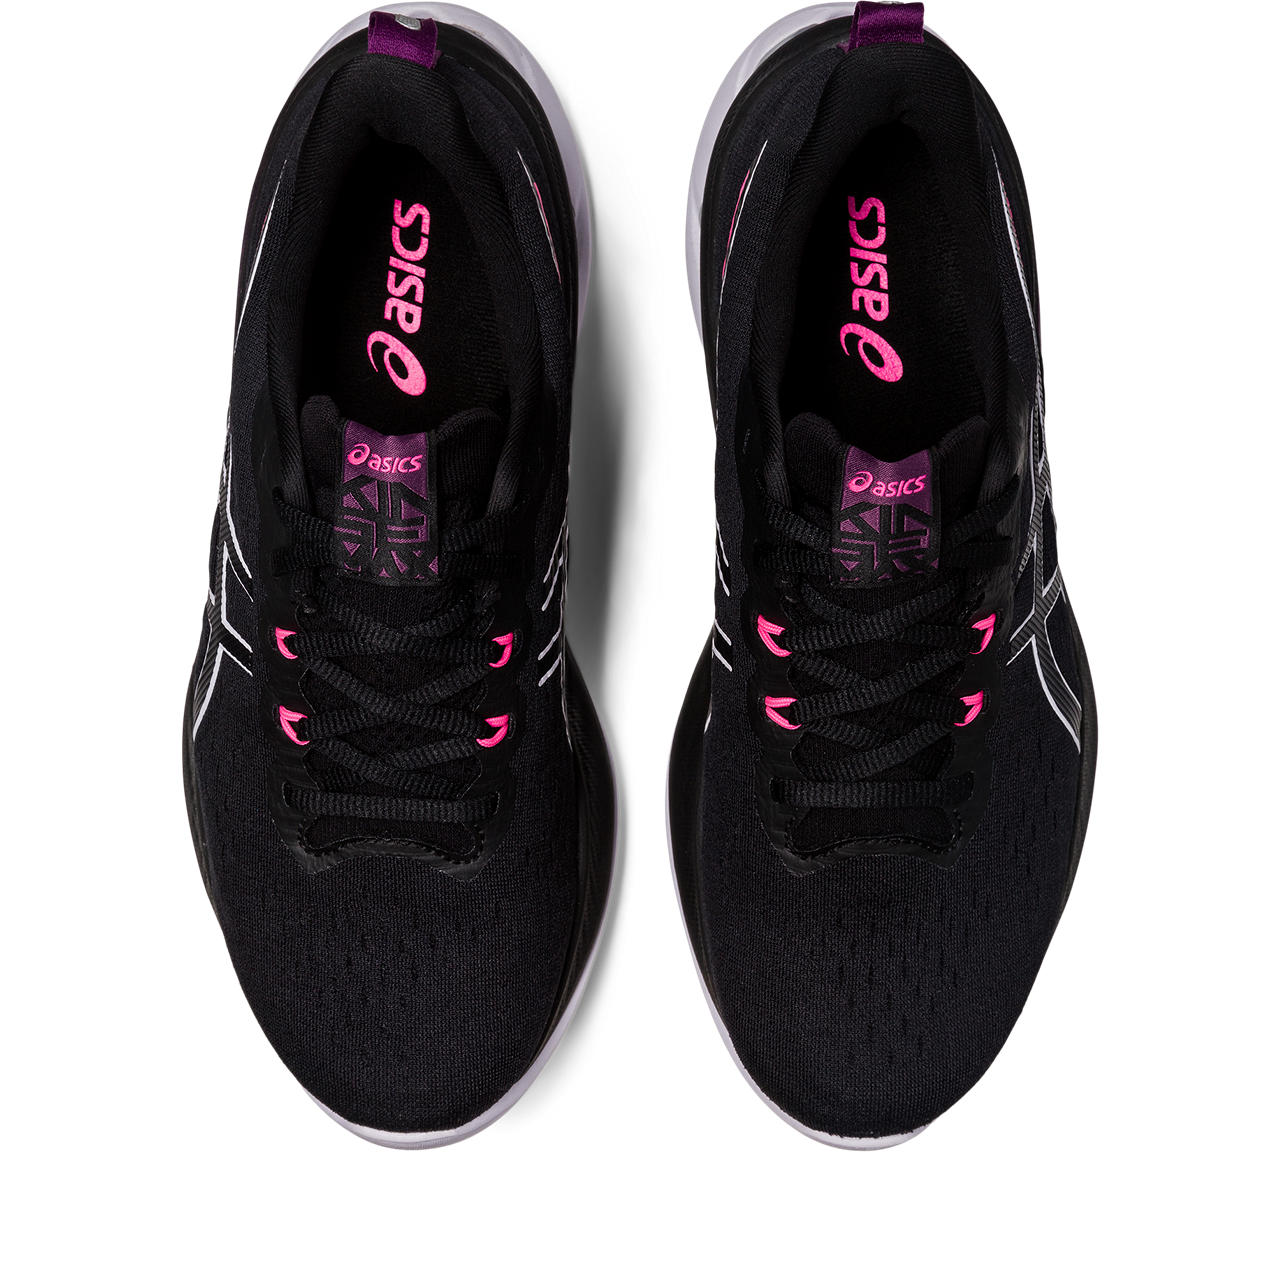 This shoe has a small ASICS and Kinsei max logo on top of the tongue that the laces go through